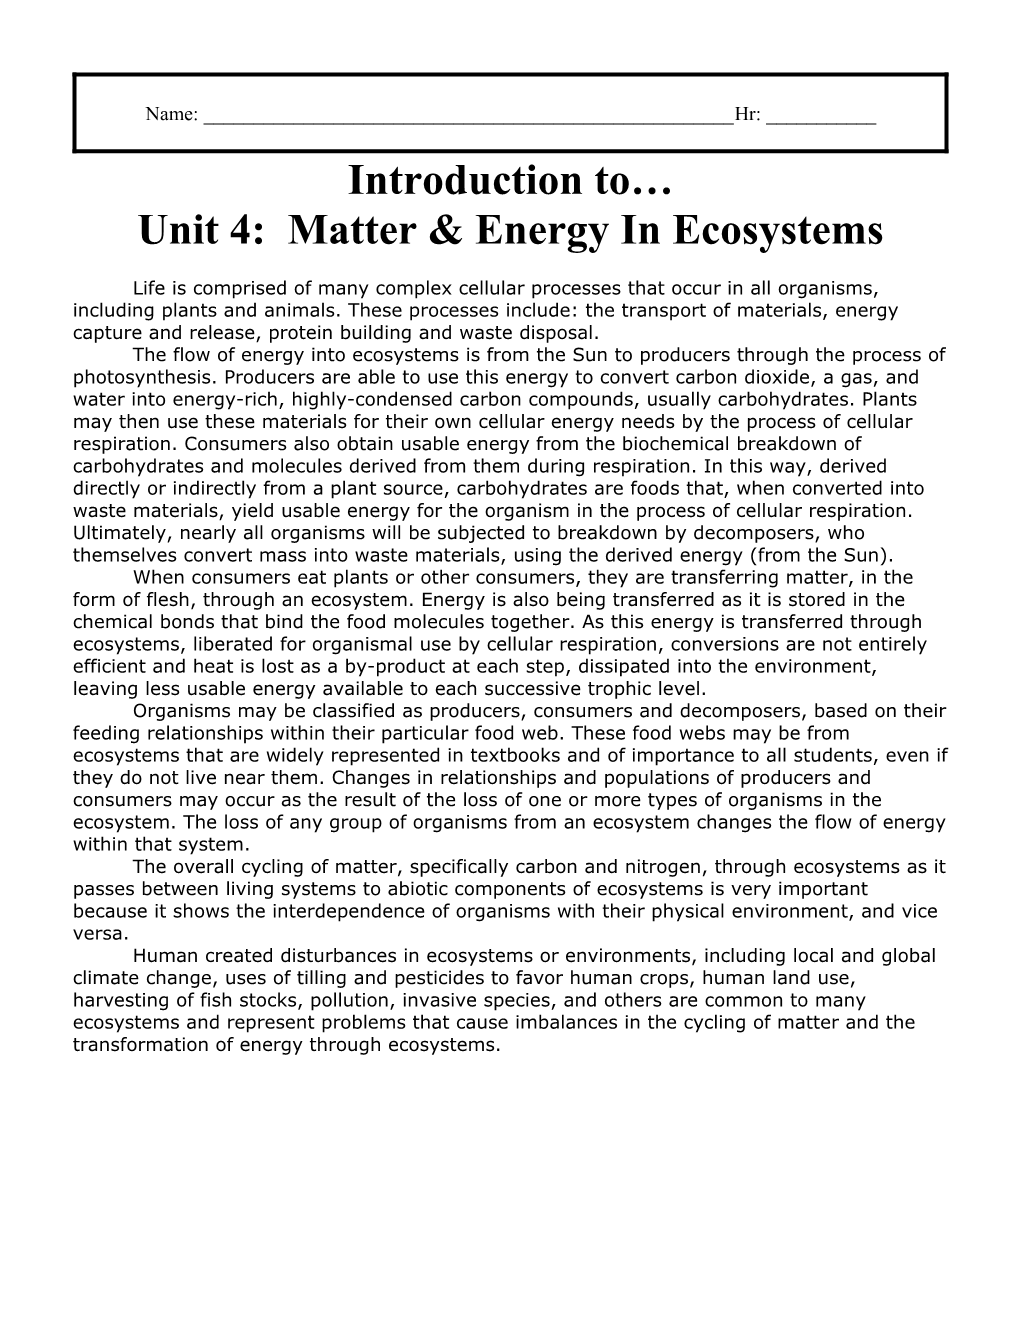 Introduction to Unit 4: Matter & Energy in Ecosystems